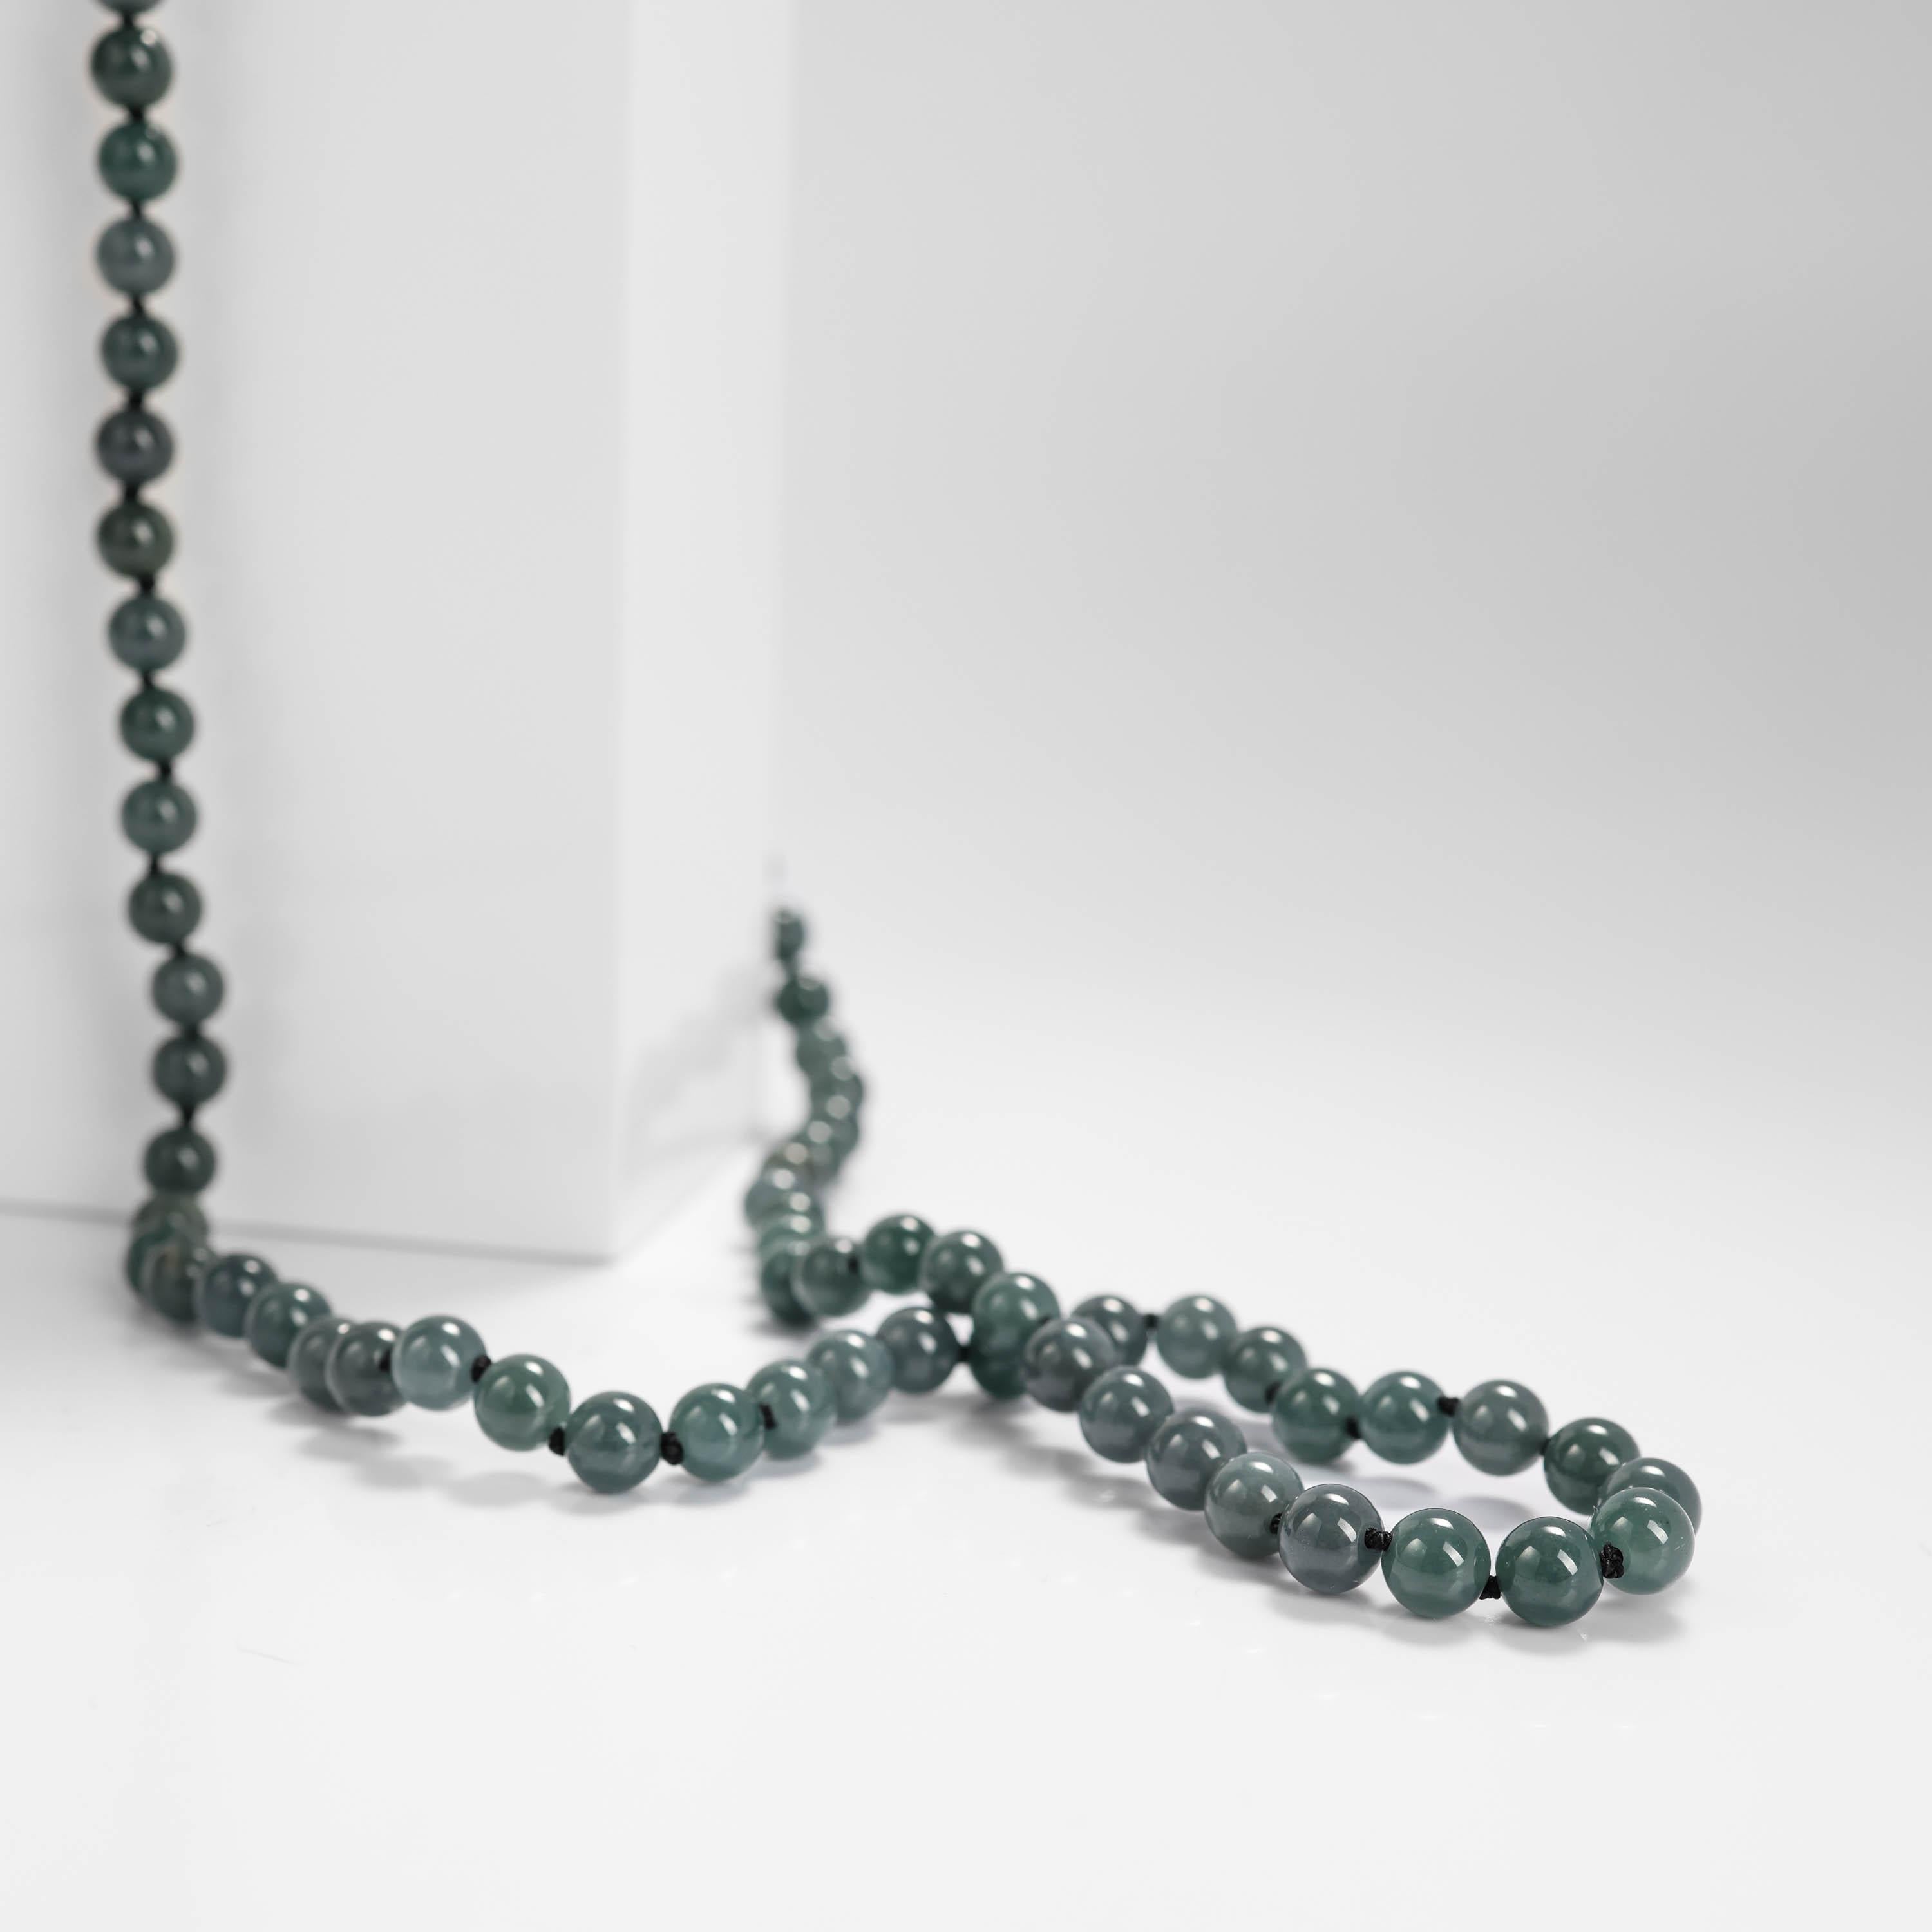 Jade Necklace Translucent Greenish-Blue Certified Untreated, New, 25